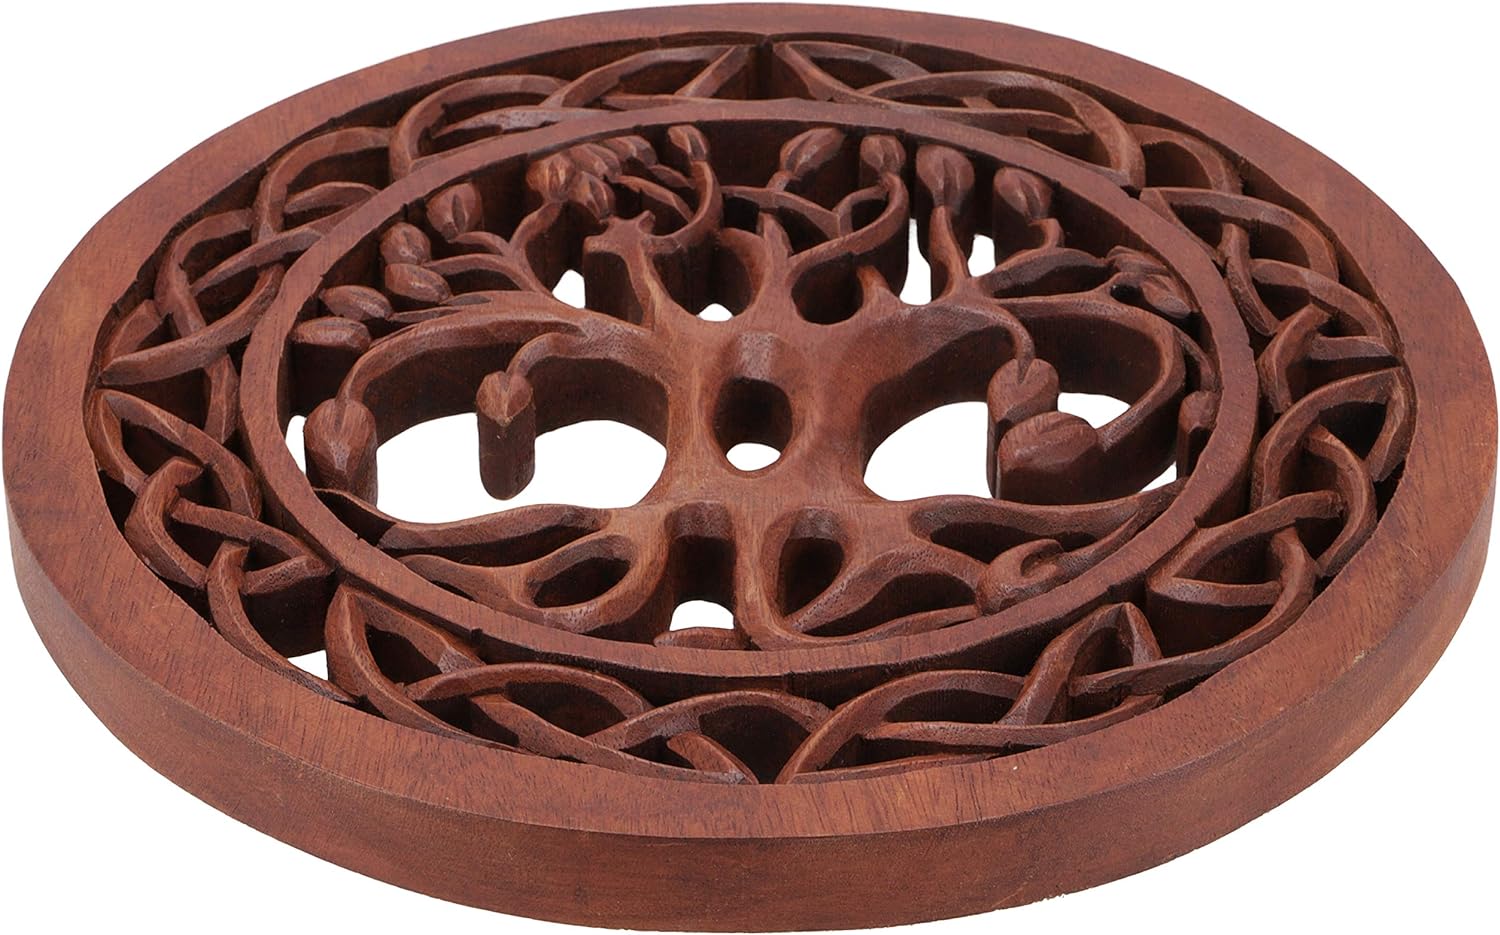 GURU SHOP Carved Wall Picture Decorative Wall Relief Flower Brown 18 x 18 x 2 cm Masks & Wall Decoration